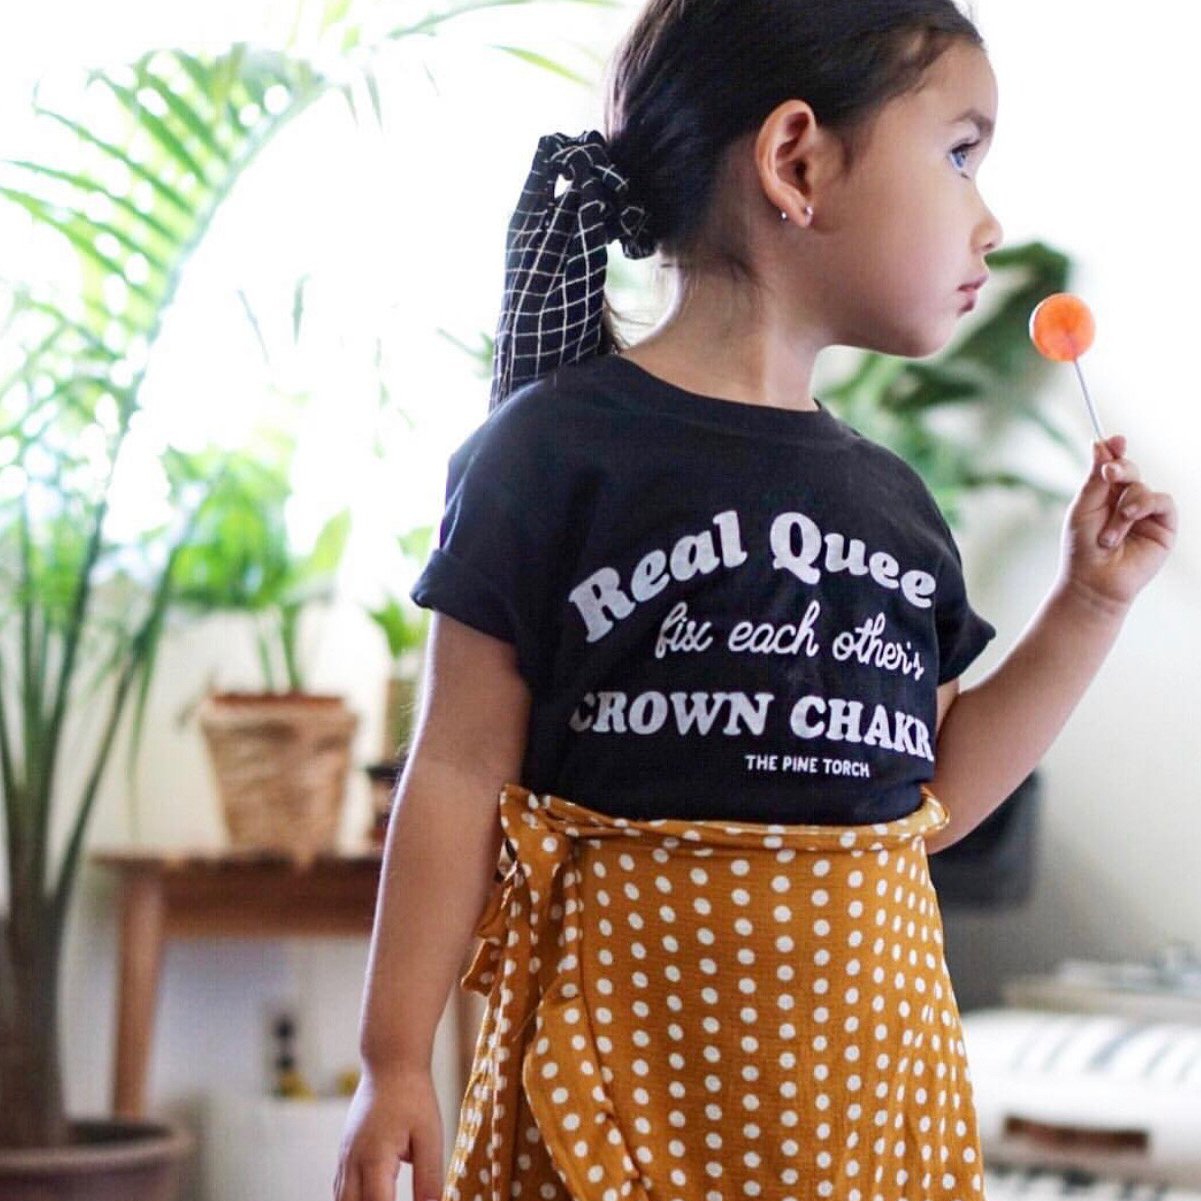 « REAL QUEENS FIX EACH OTHER'S CROWN CHAKRAS » KID'S TEE